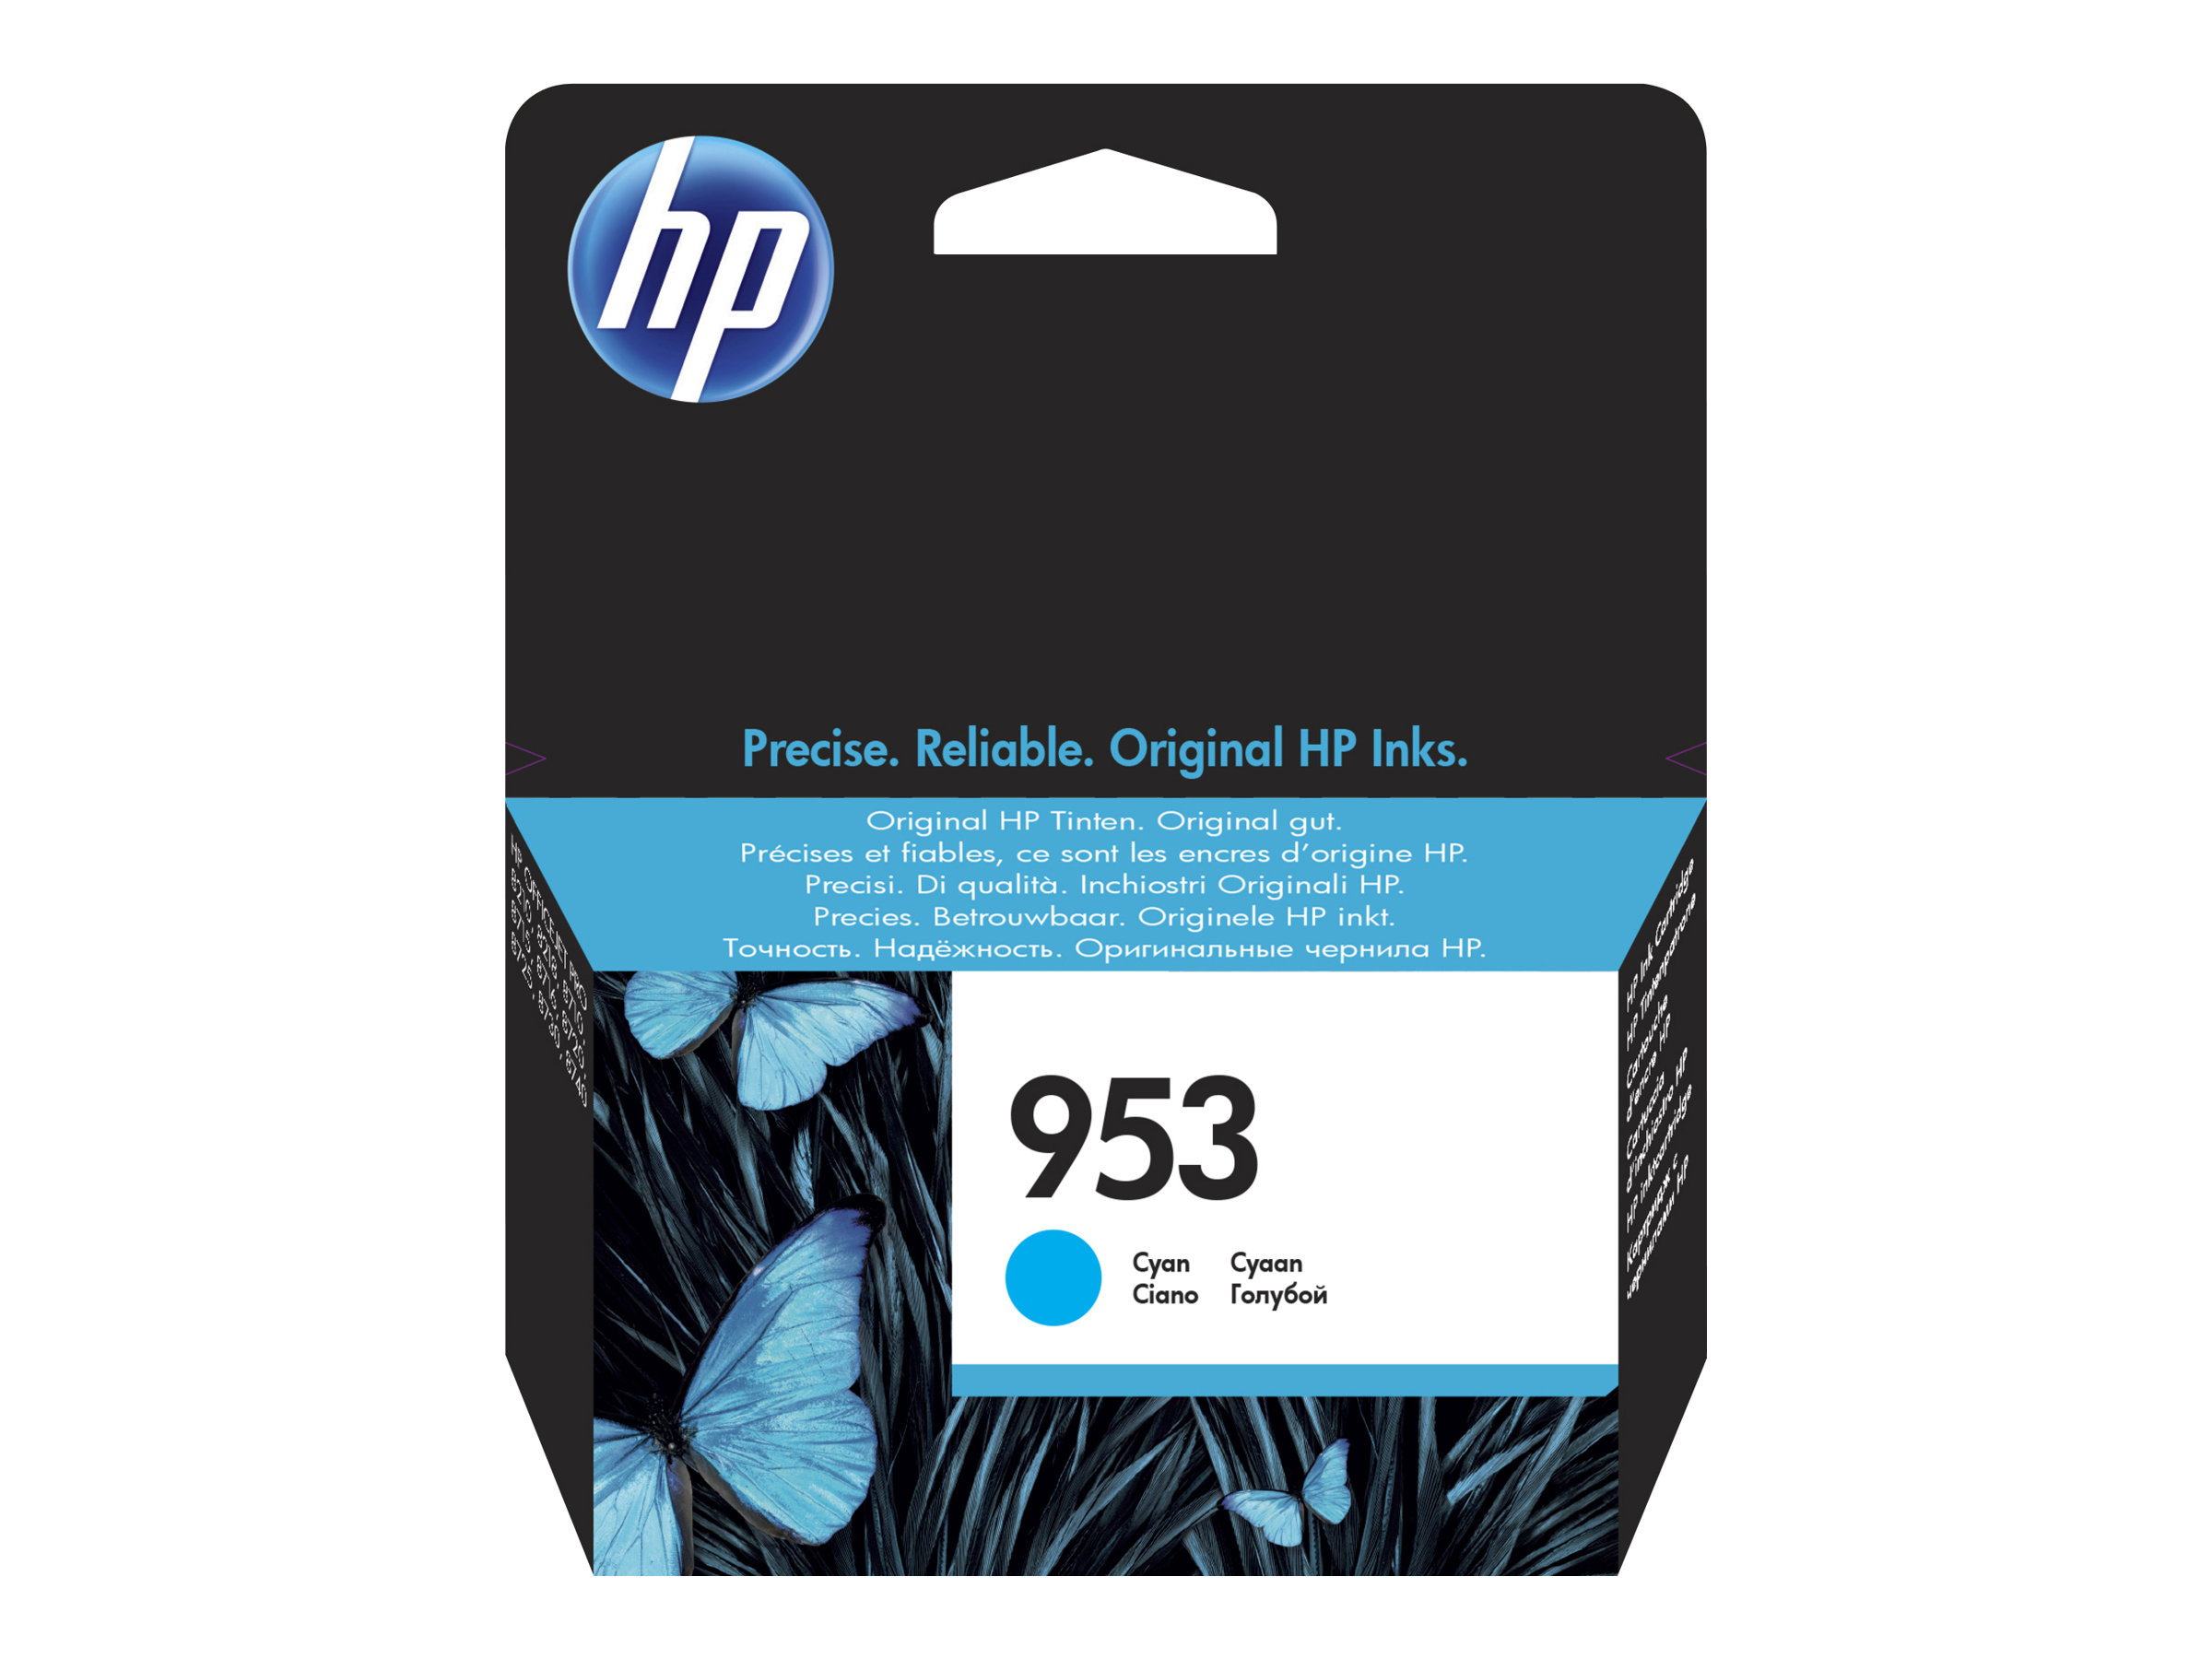 User manual HP OfficeJet Pro 8730 (English - 181 pages)